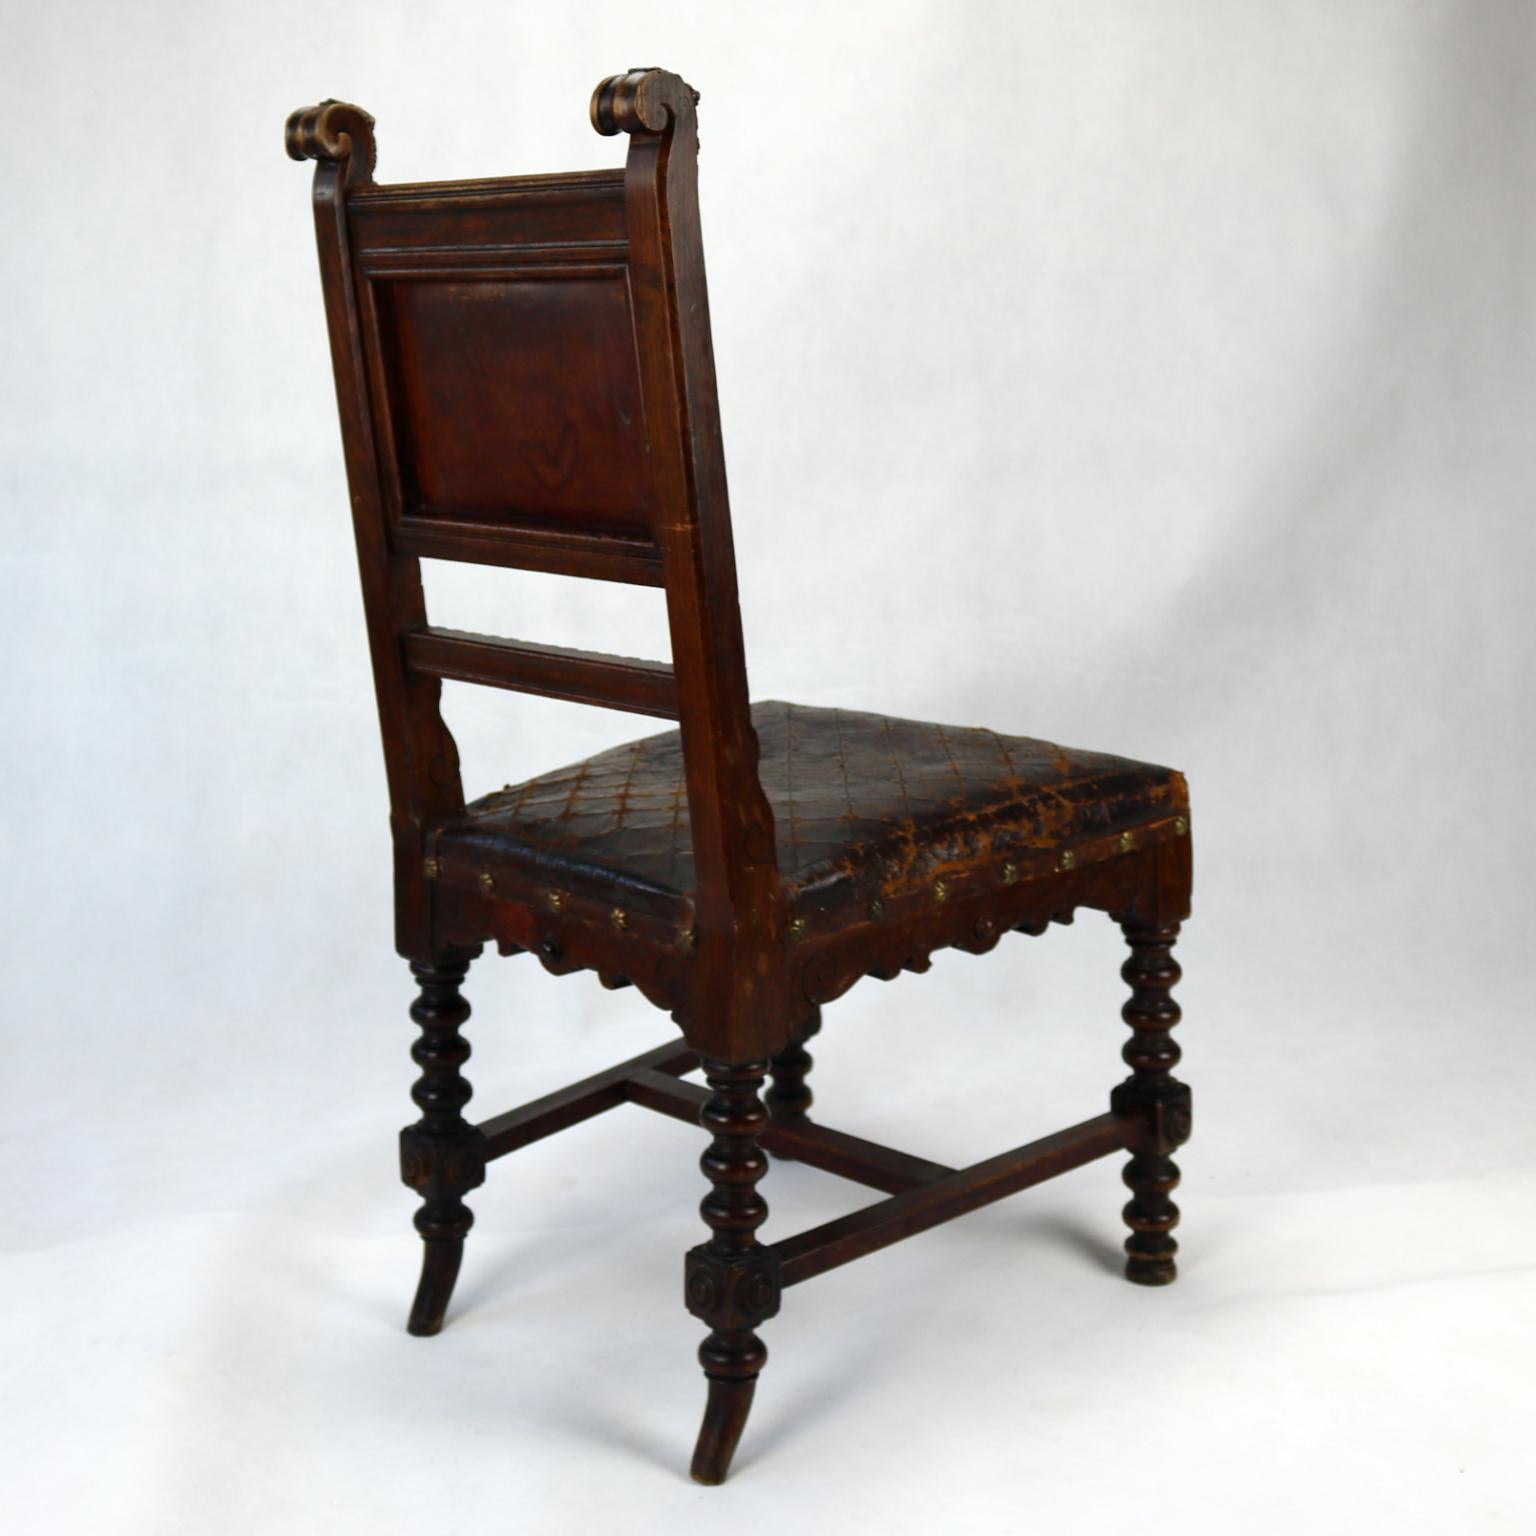 Reanaissance Revival Hand-Carved Chair with Embossed Leather 19th Century For Sale 1